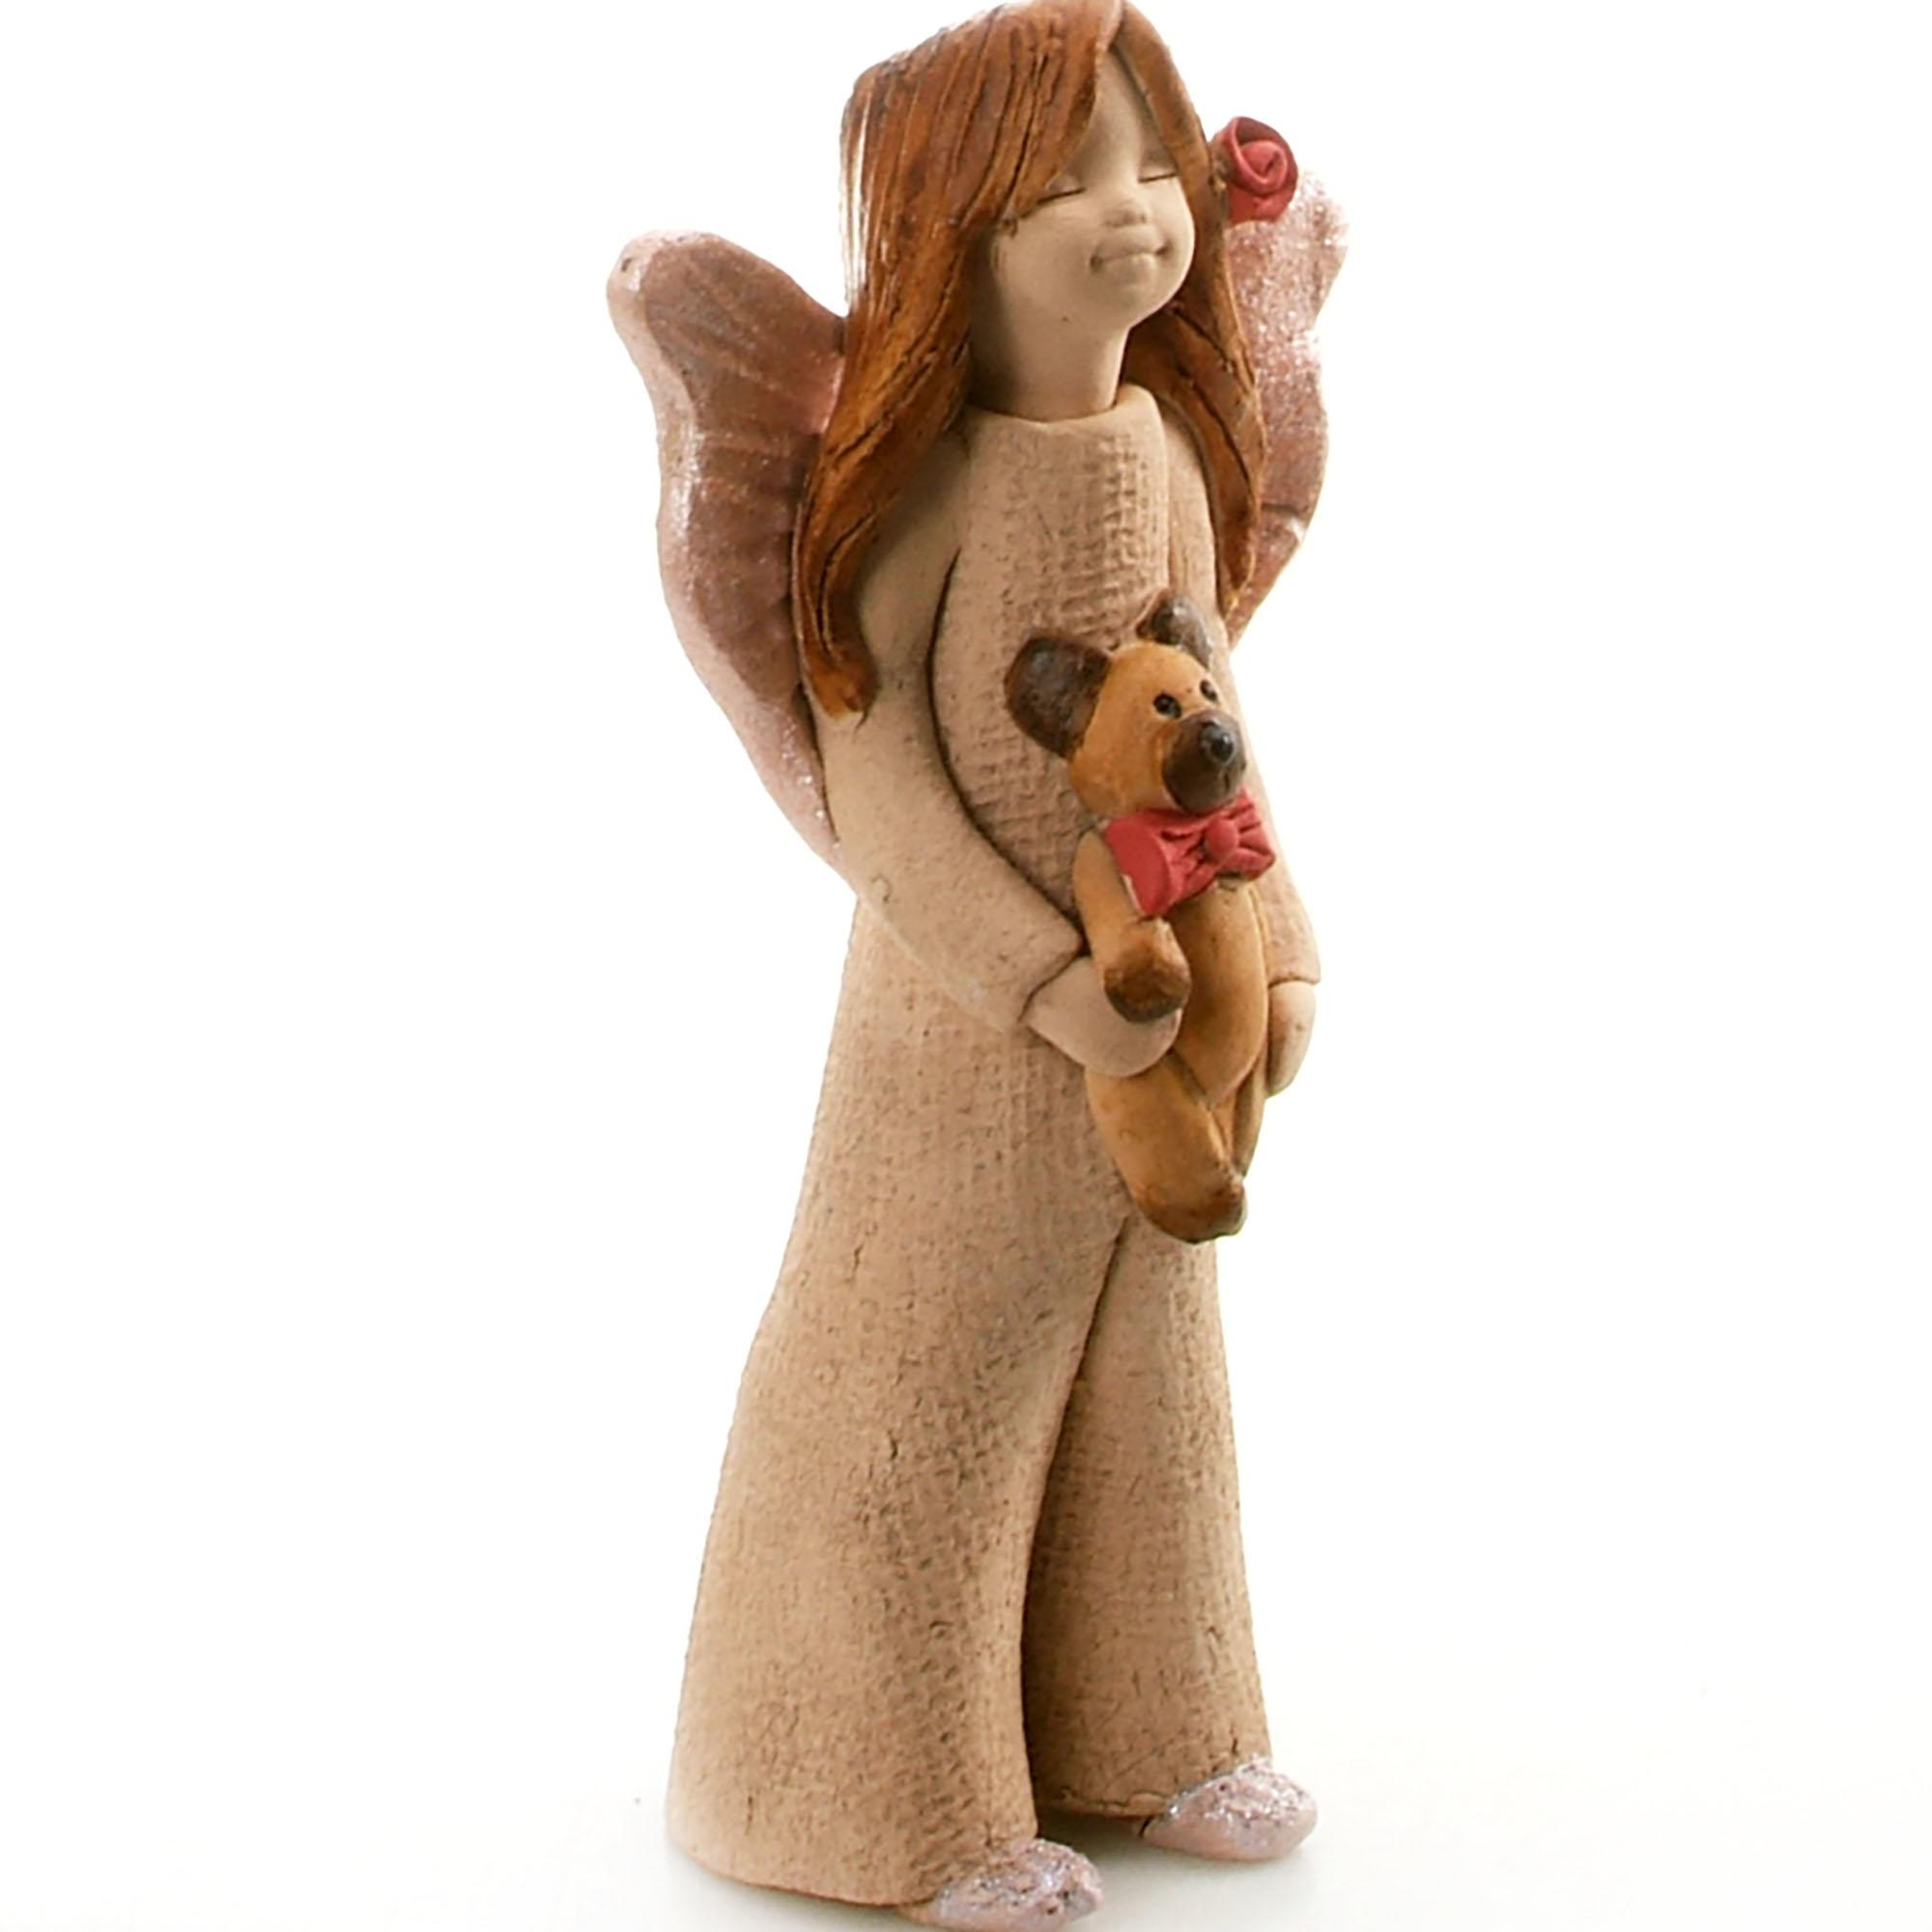 Guardian Angel Figurine with a Sentiment Card